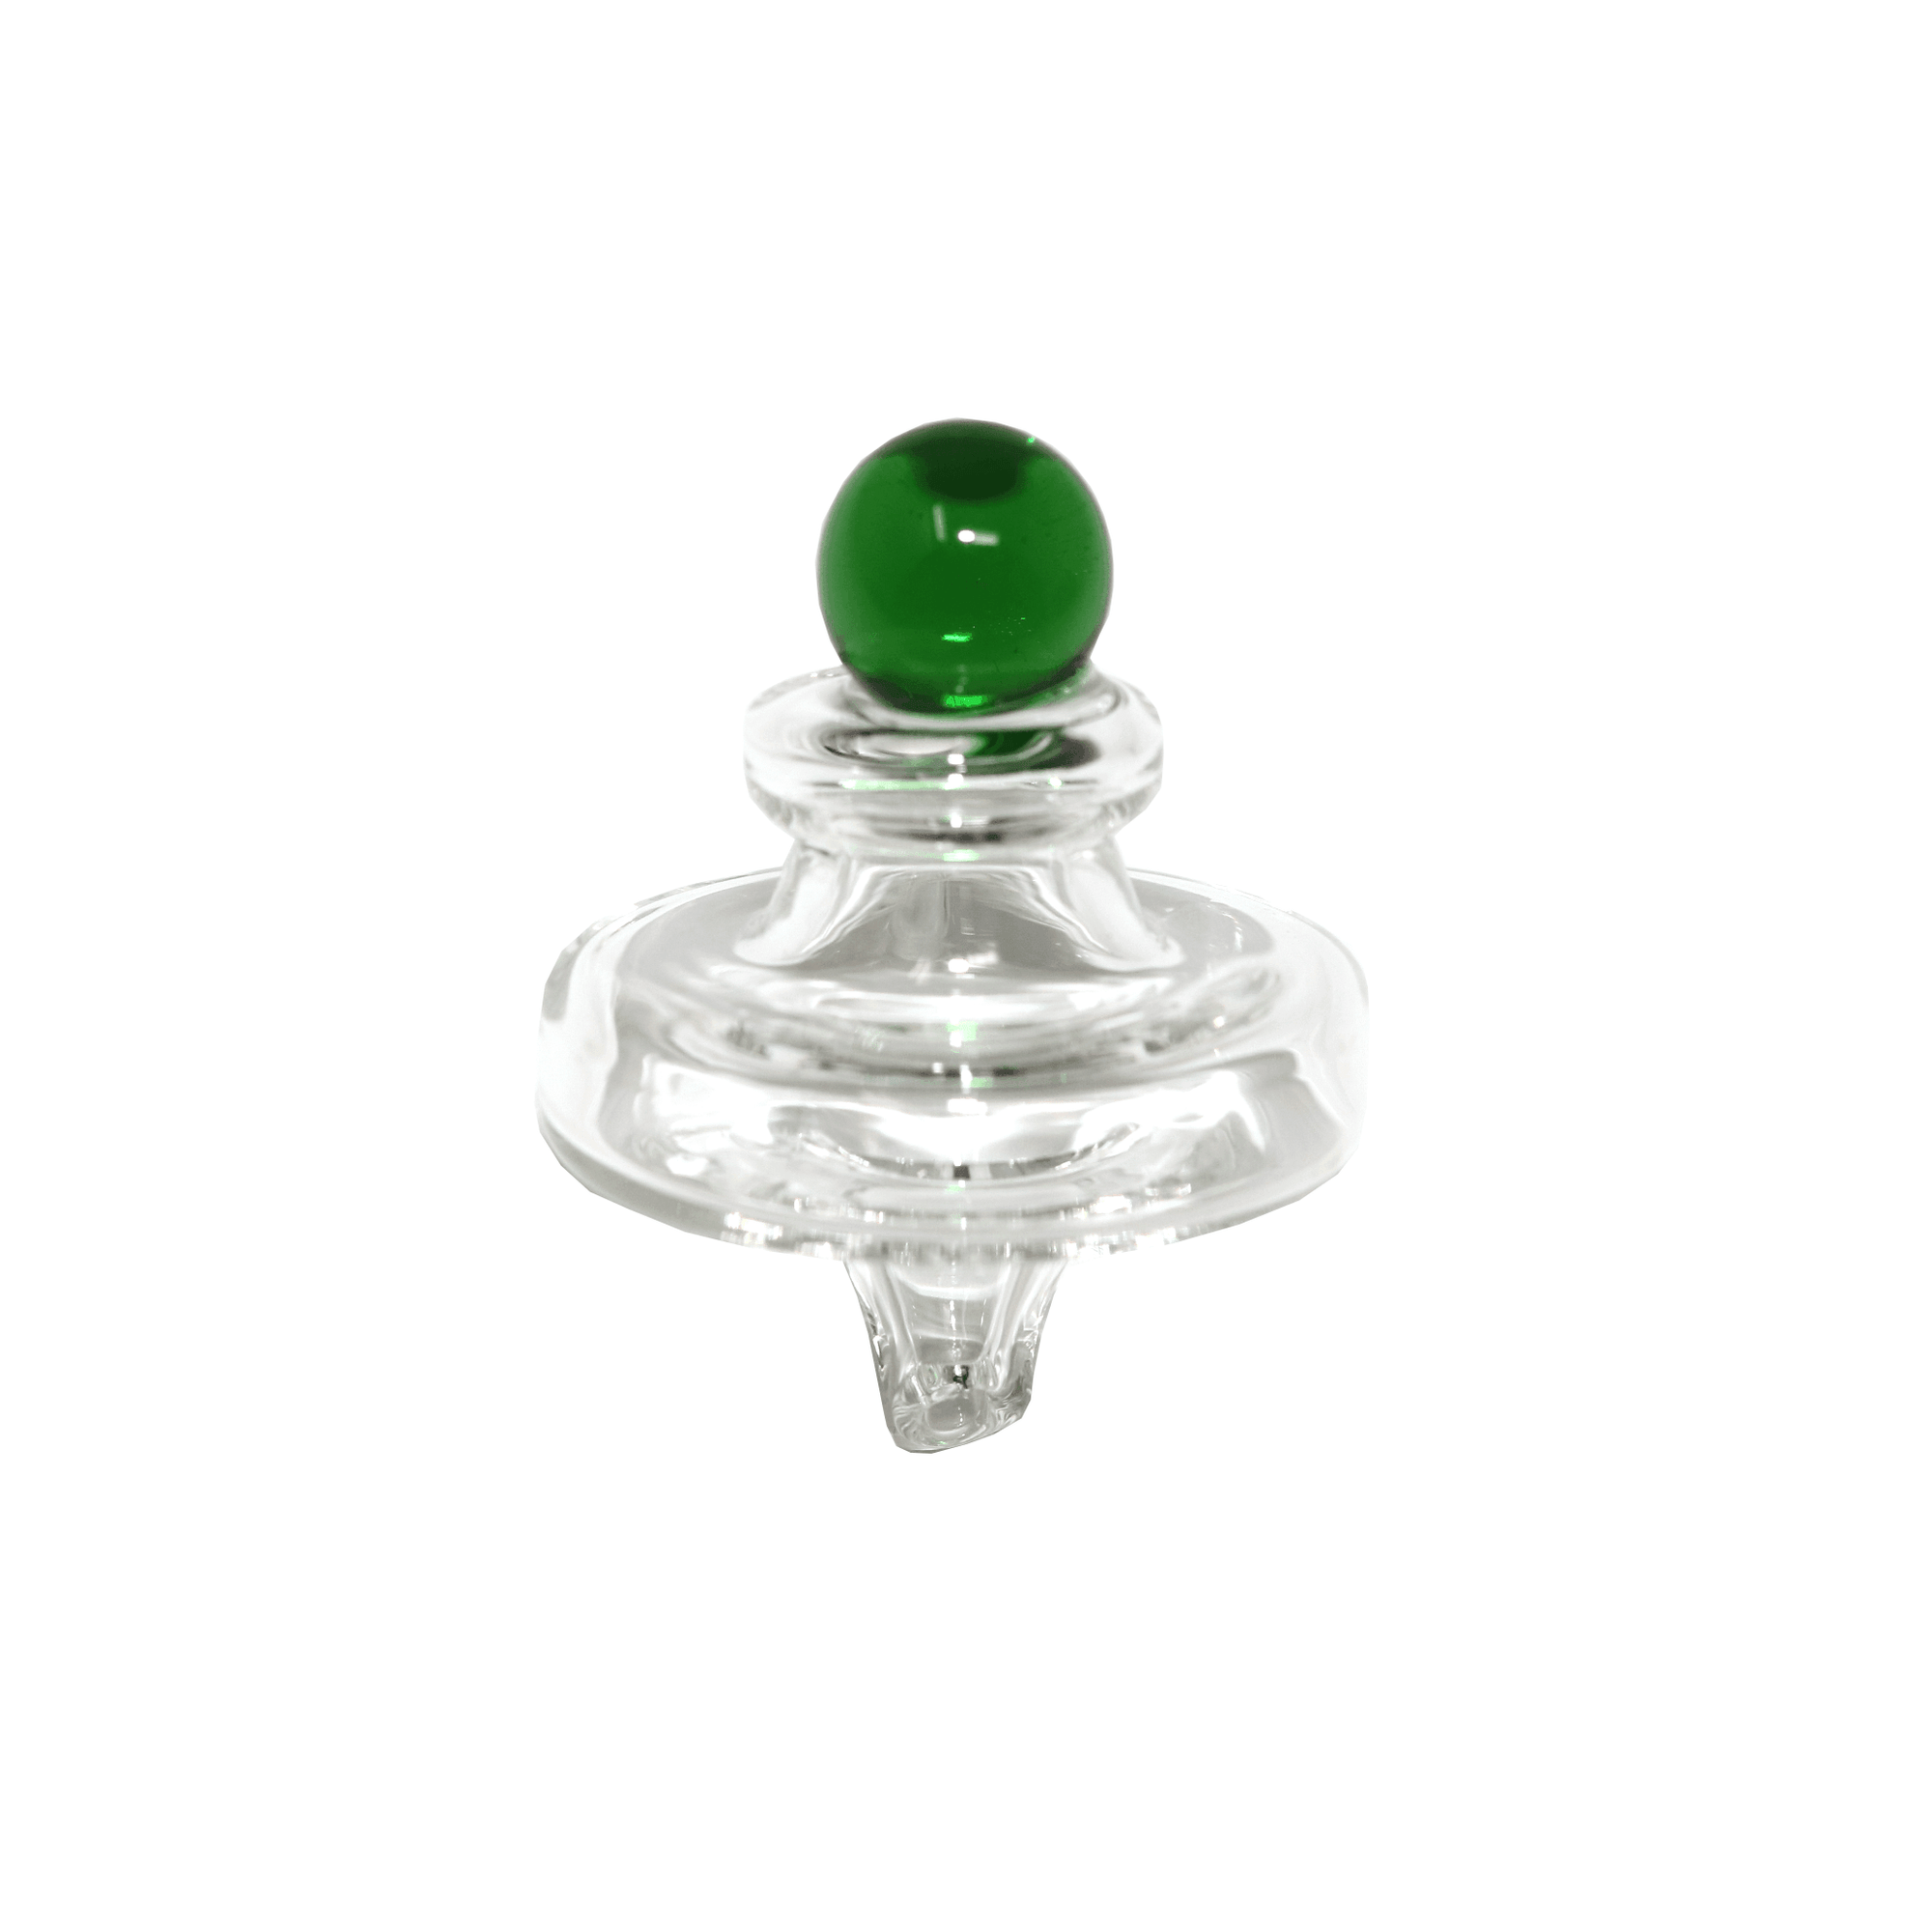 Quartz Banger Core Reactor 10mm Male With Saucer Cap | Saucer Cap View | the dabbing specialists